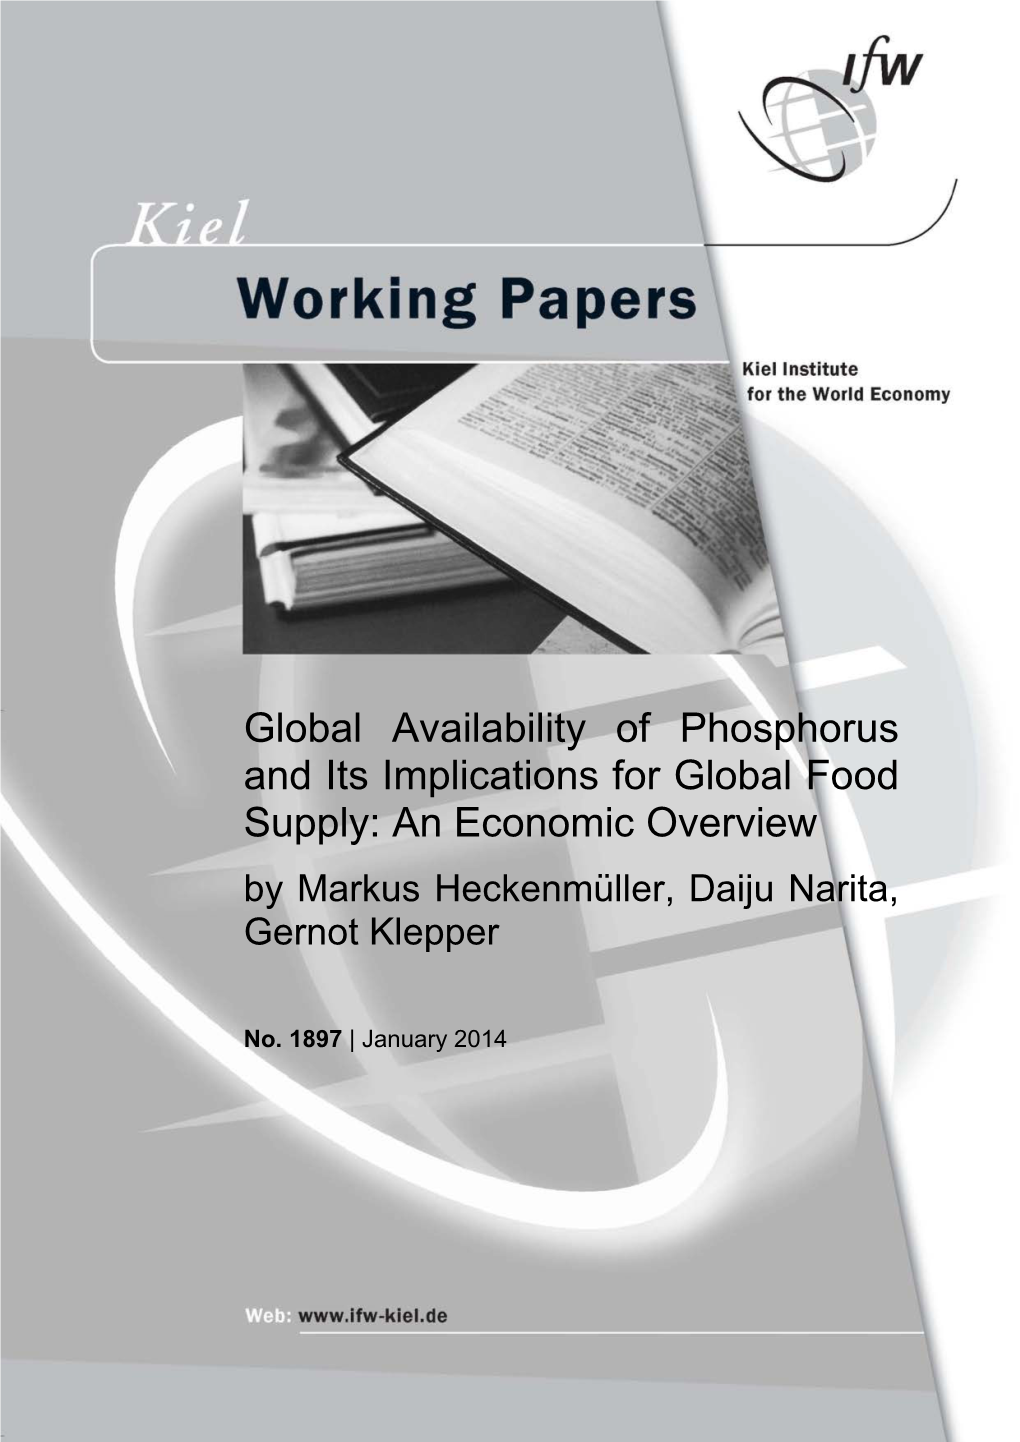 Global Availability of Phosphorus and Its Implications for Global Food Supply: an Economic Overview by Markus Heckenmüller, Daiju Narita, Gernot Klepper